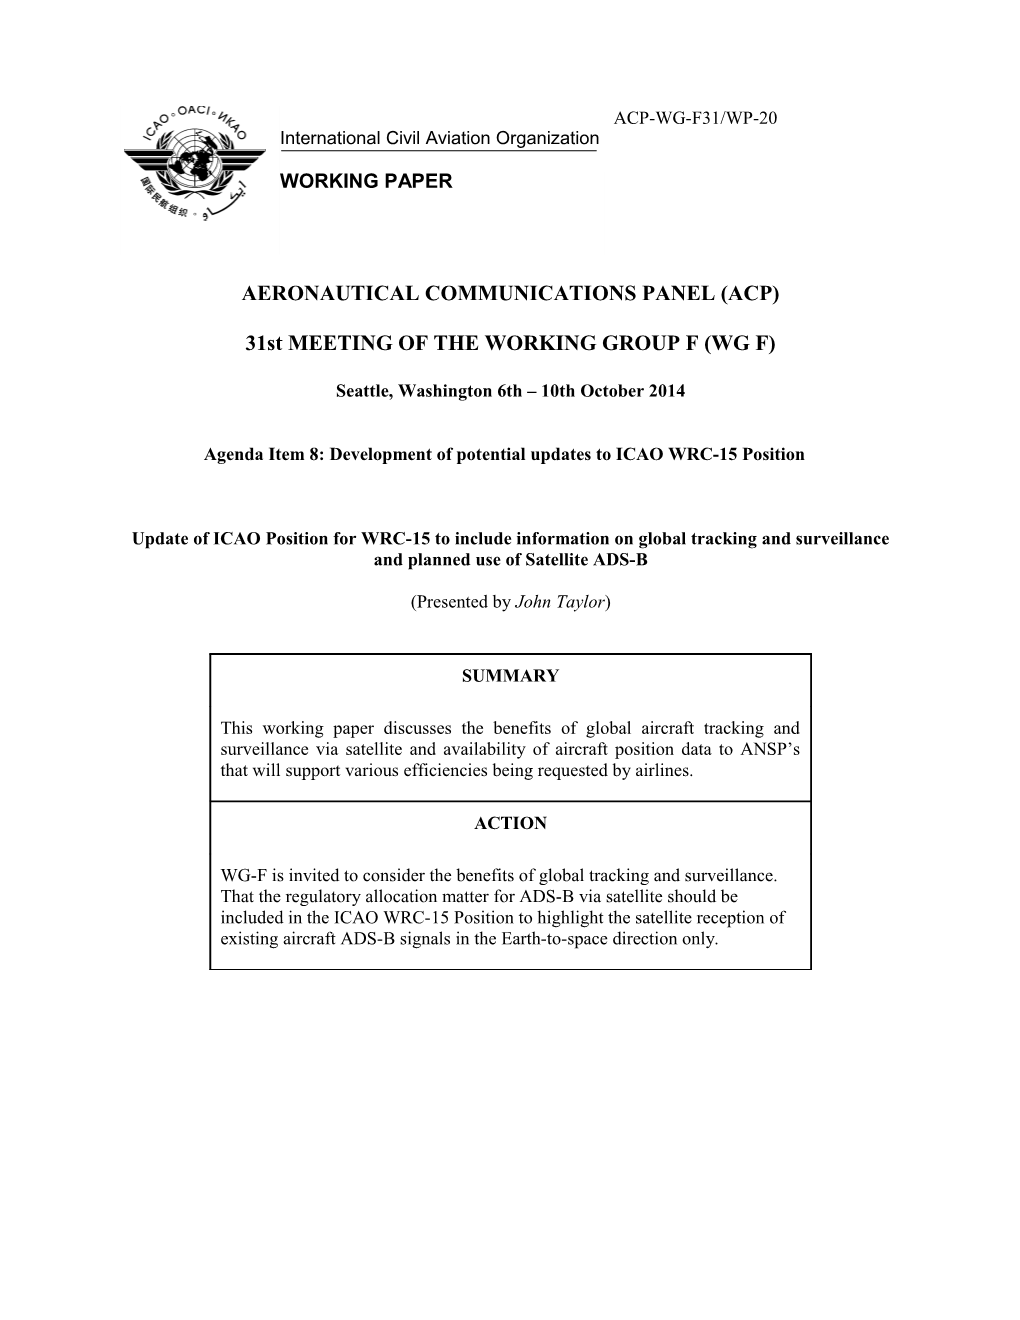 Update of ICAO Position for WRC-15 to Include Information on Global Tracking and Surveillance